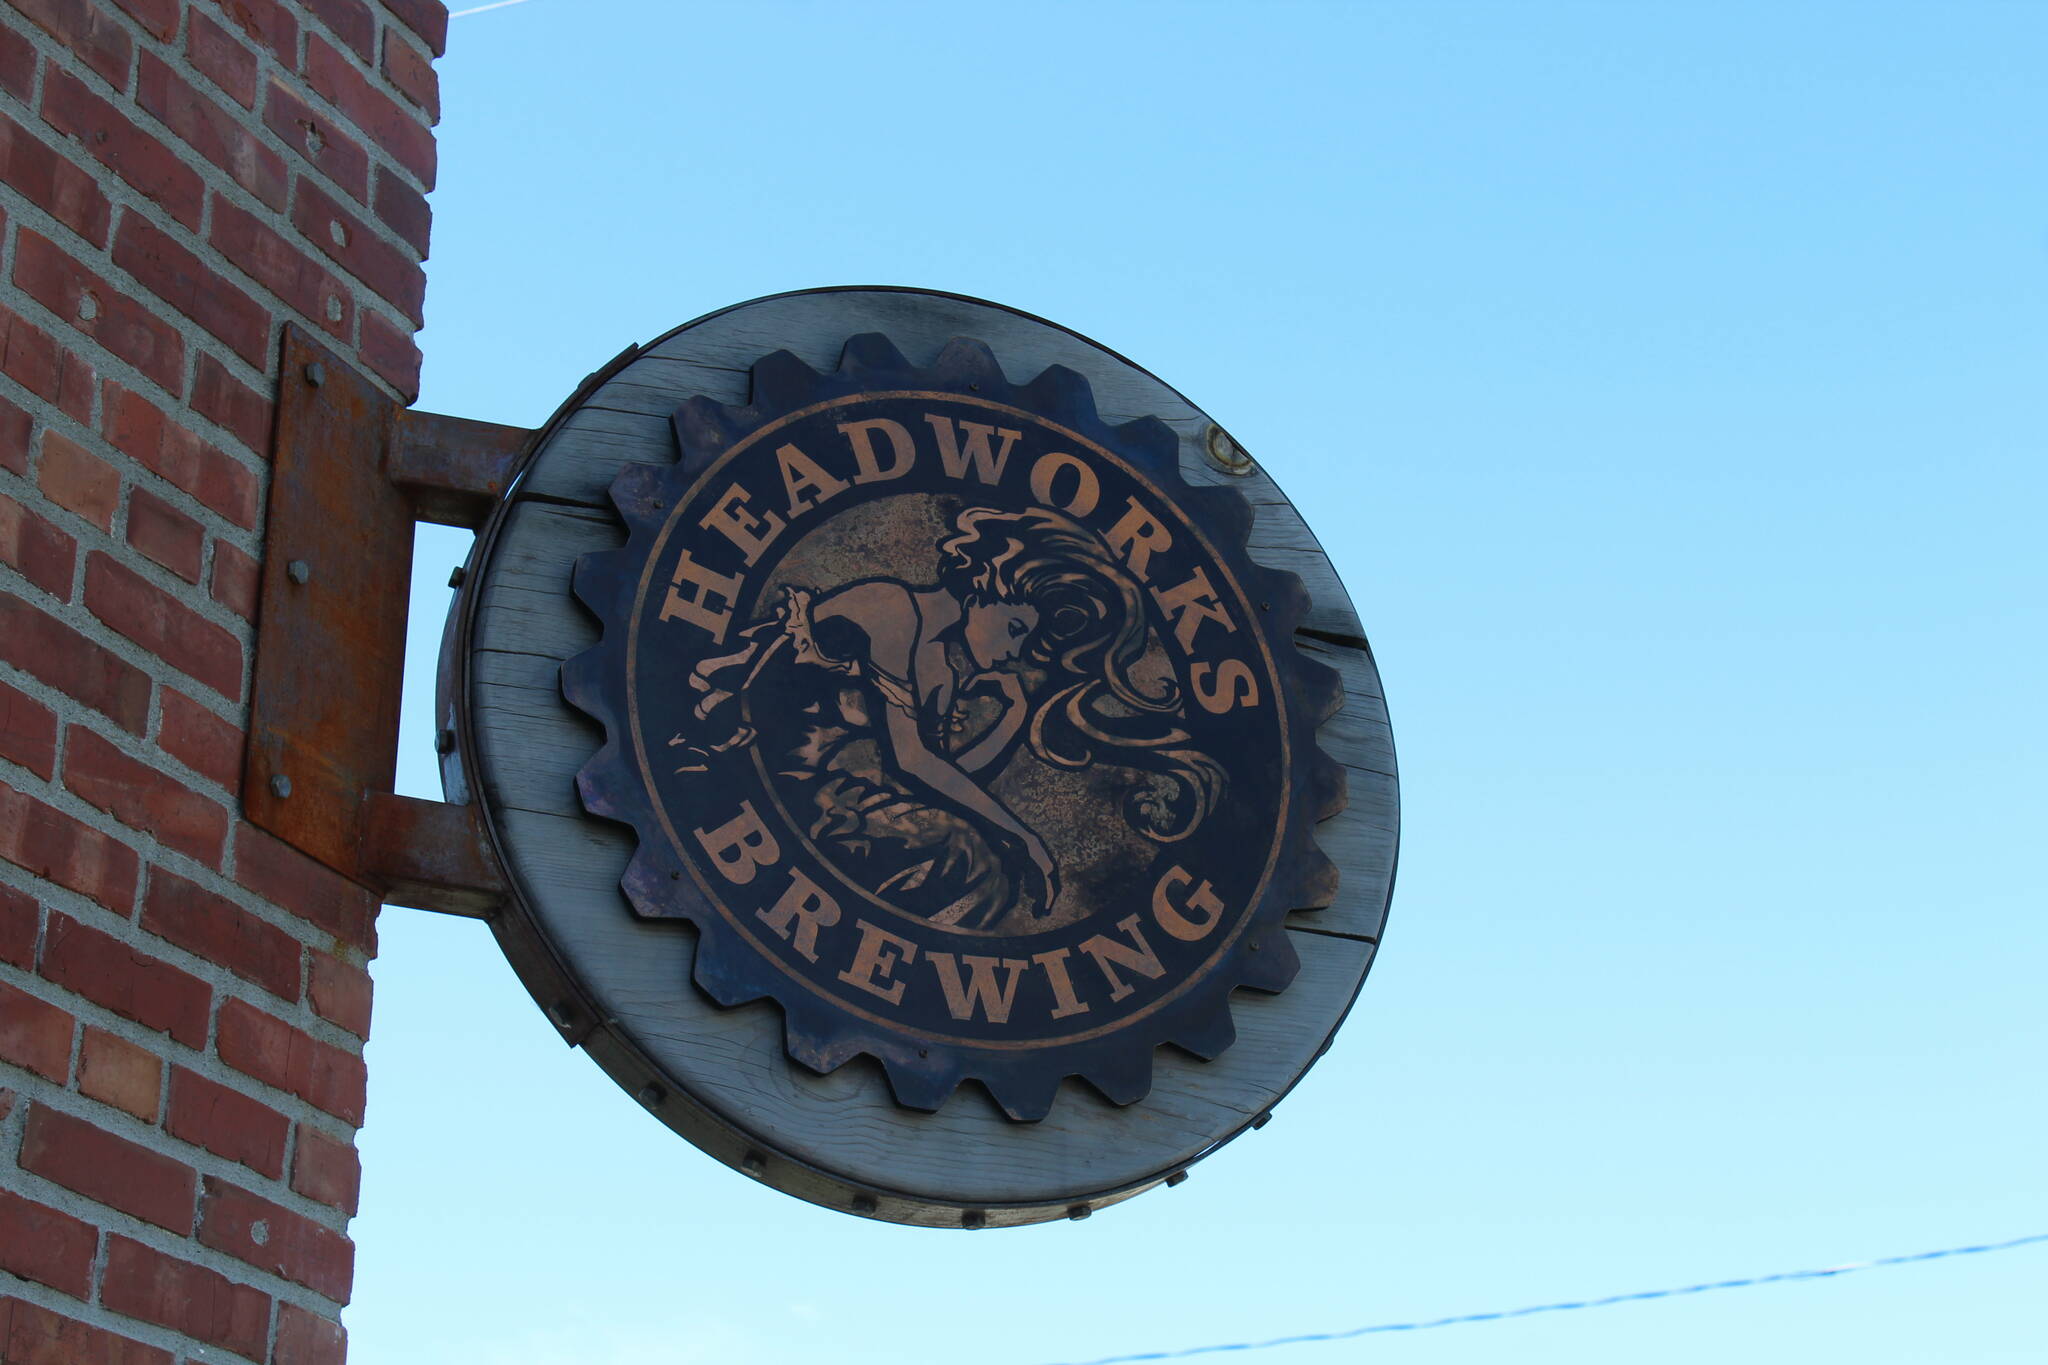 Headworks Brewing in Enumclaw is among the two dozen breweries participating in this year’s Beer Walk.